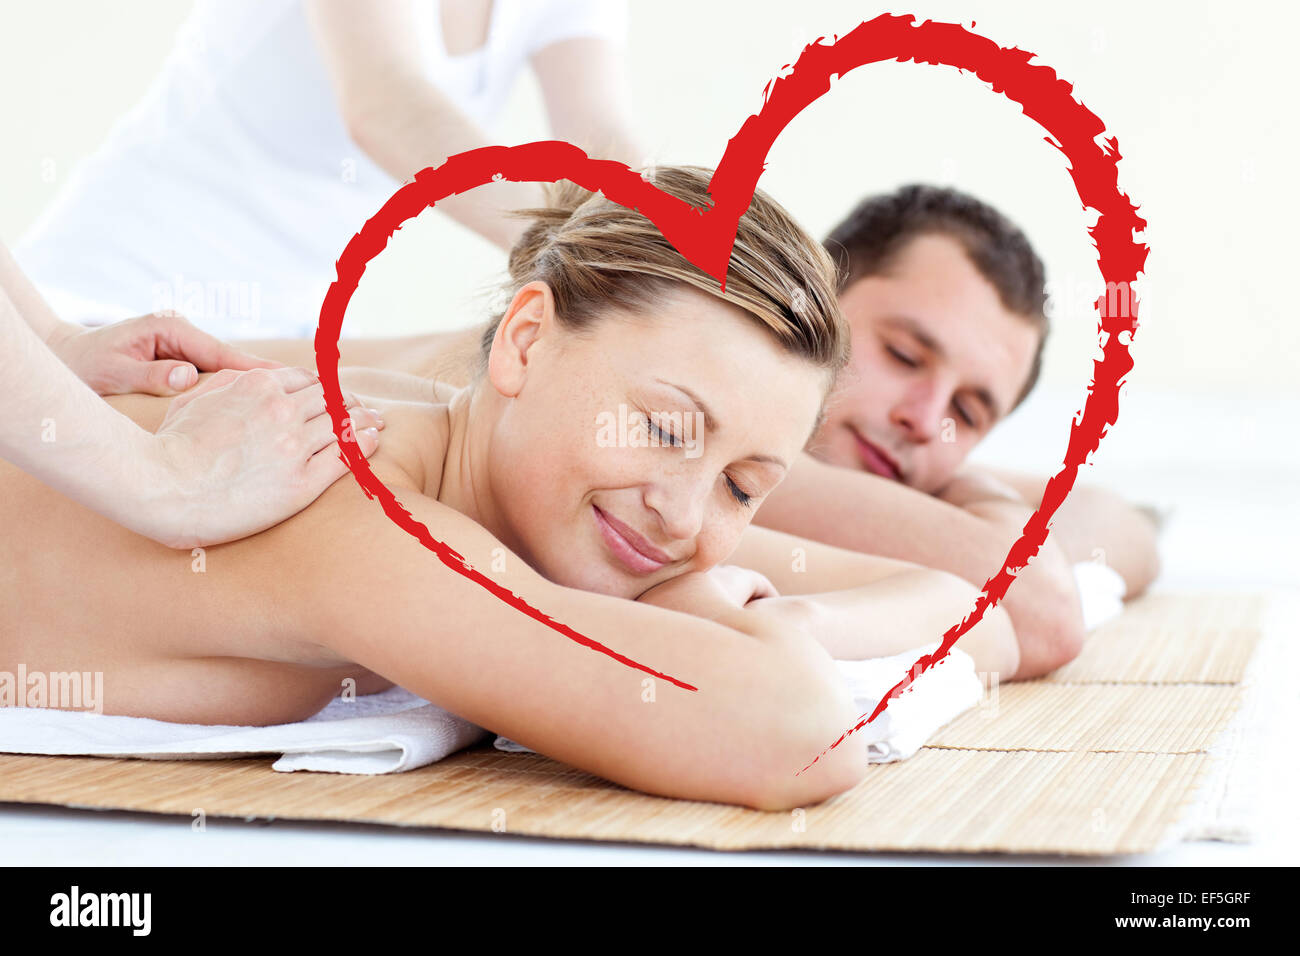 Composite image of affectionate couple having a back massage with closed eyes Stock Photo